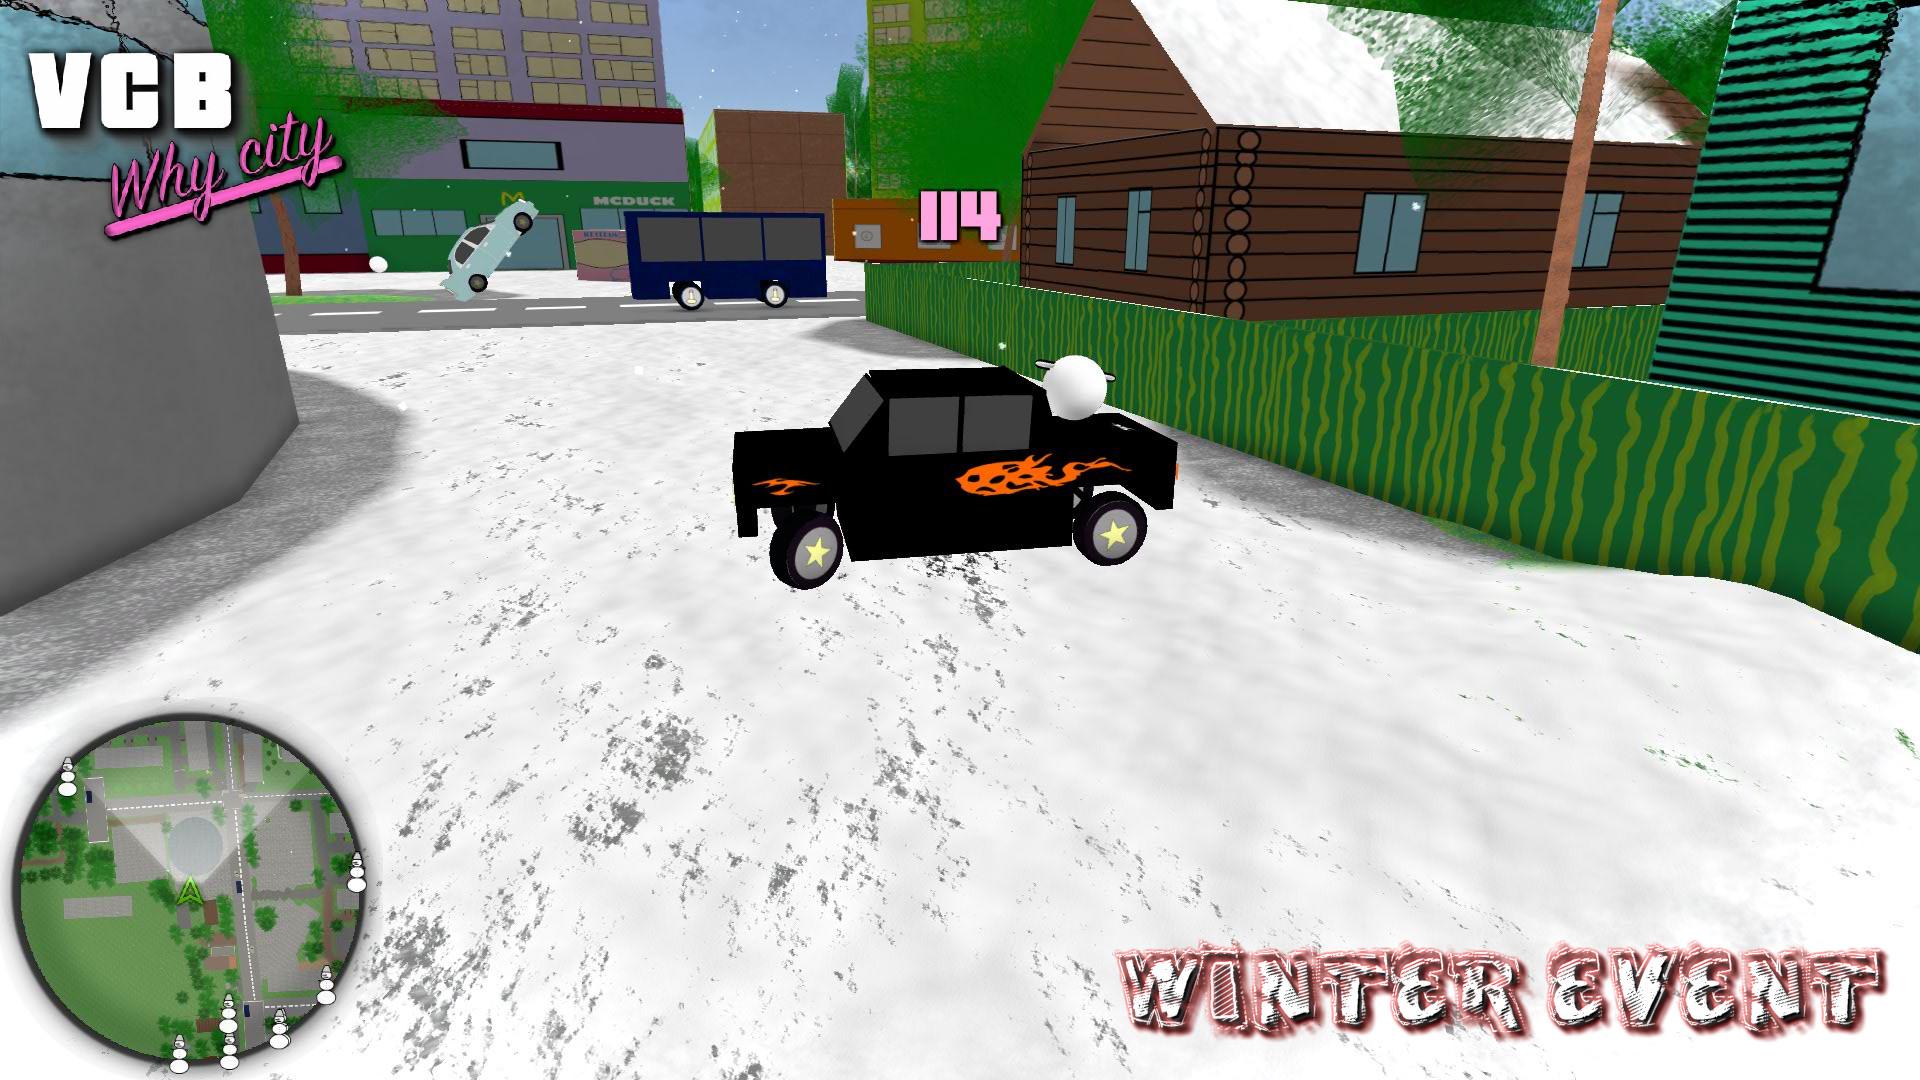 Screenshot №3 from game VCB: Why City (Beta Version)